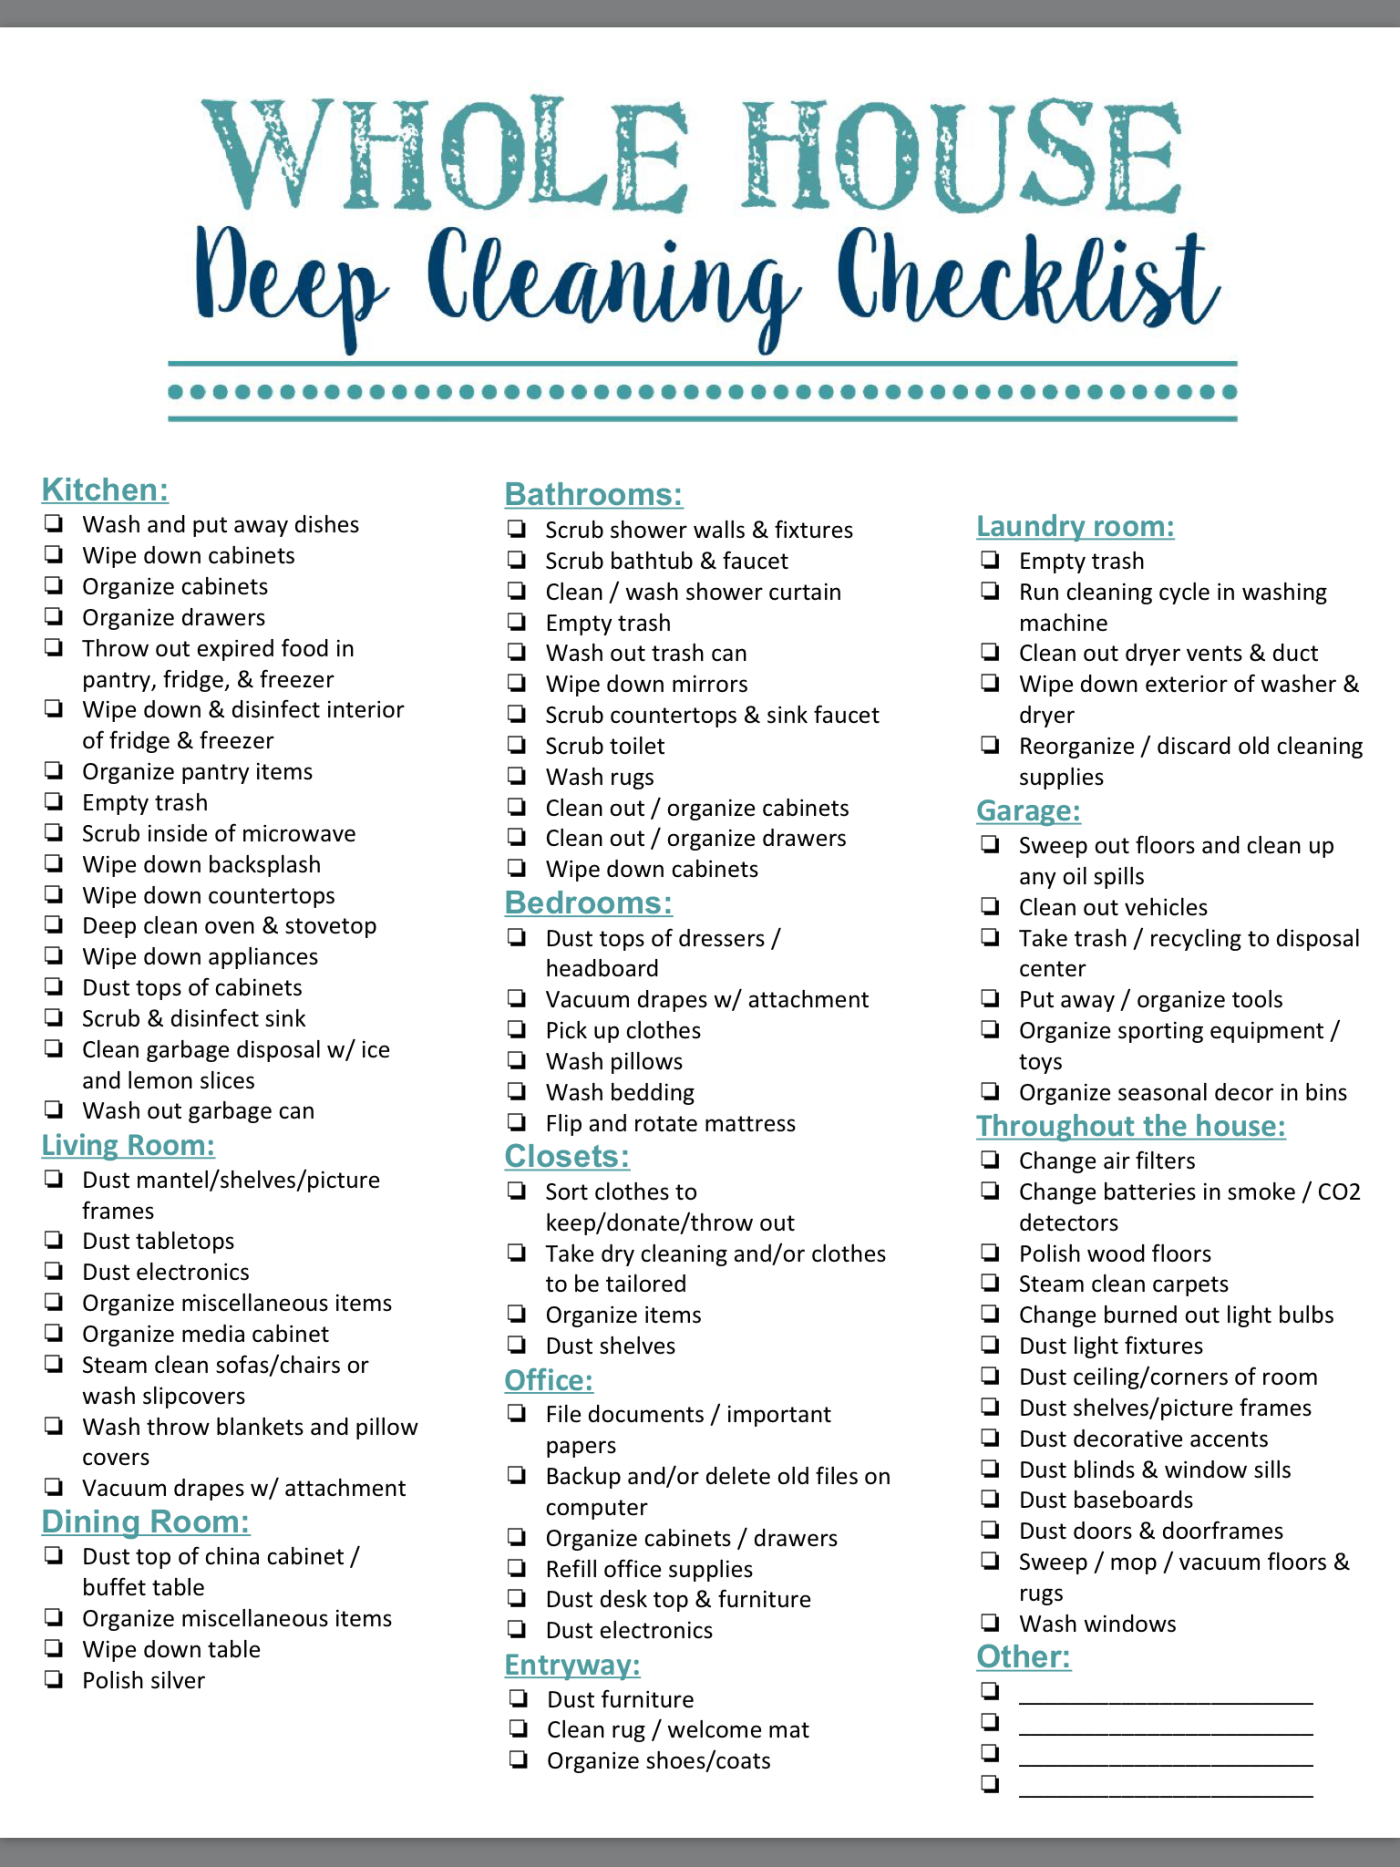 9-professional-house-cleaning-checklist-template-perfect-template-ideas